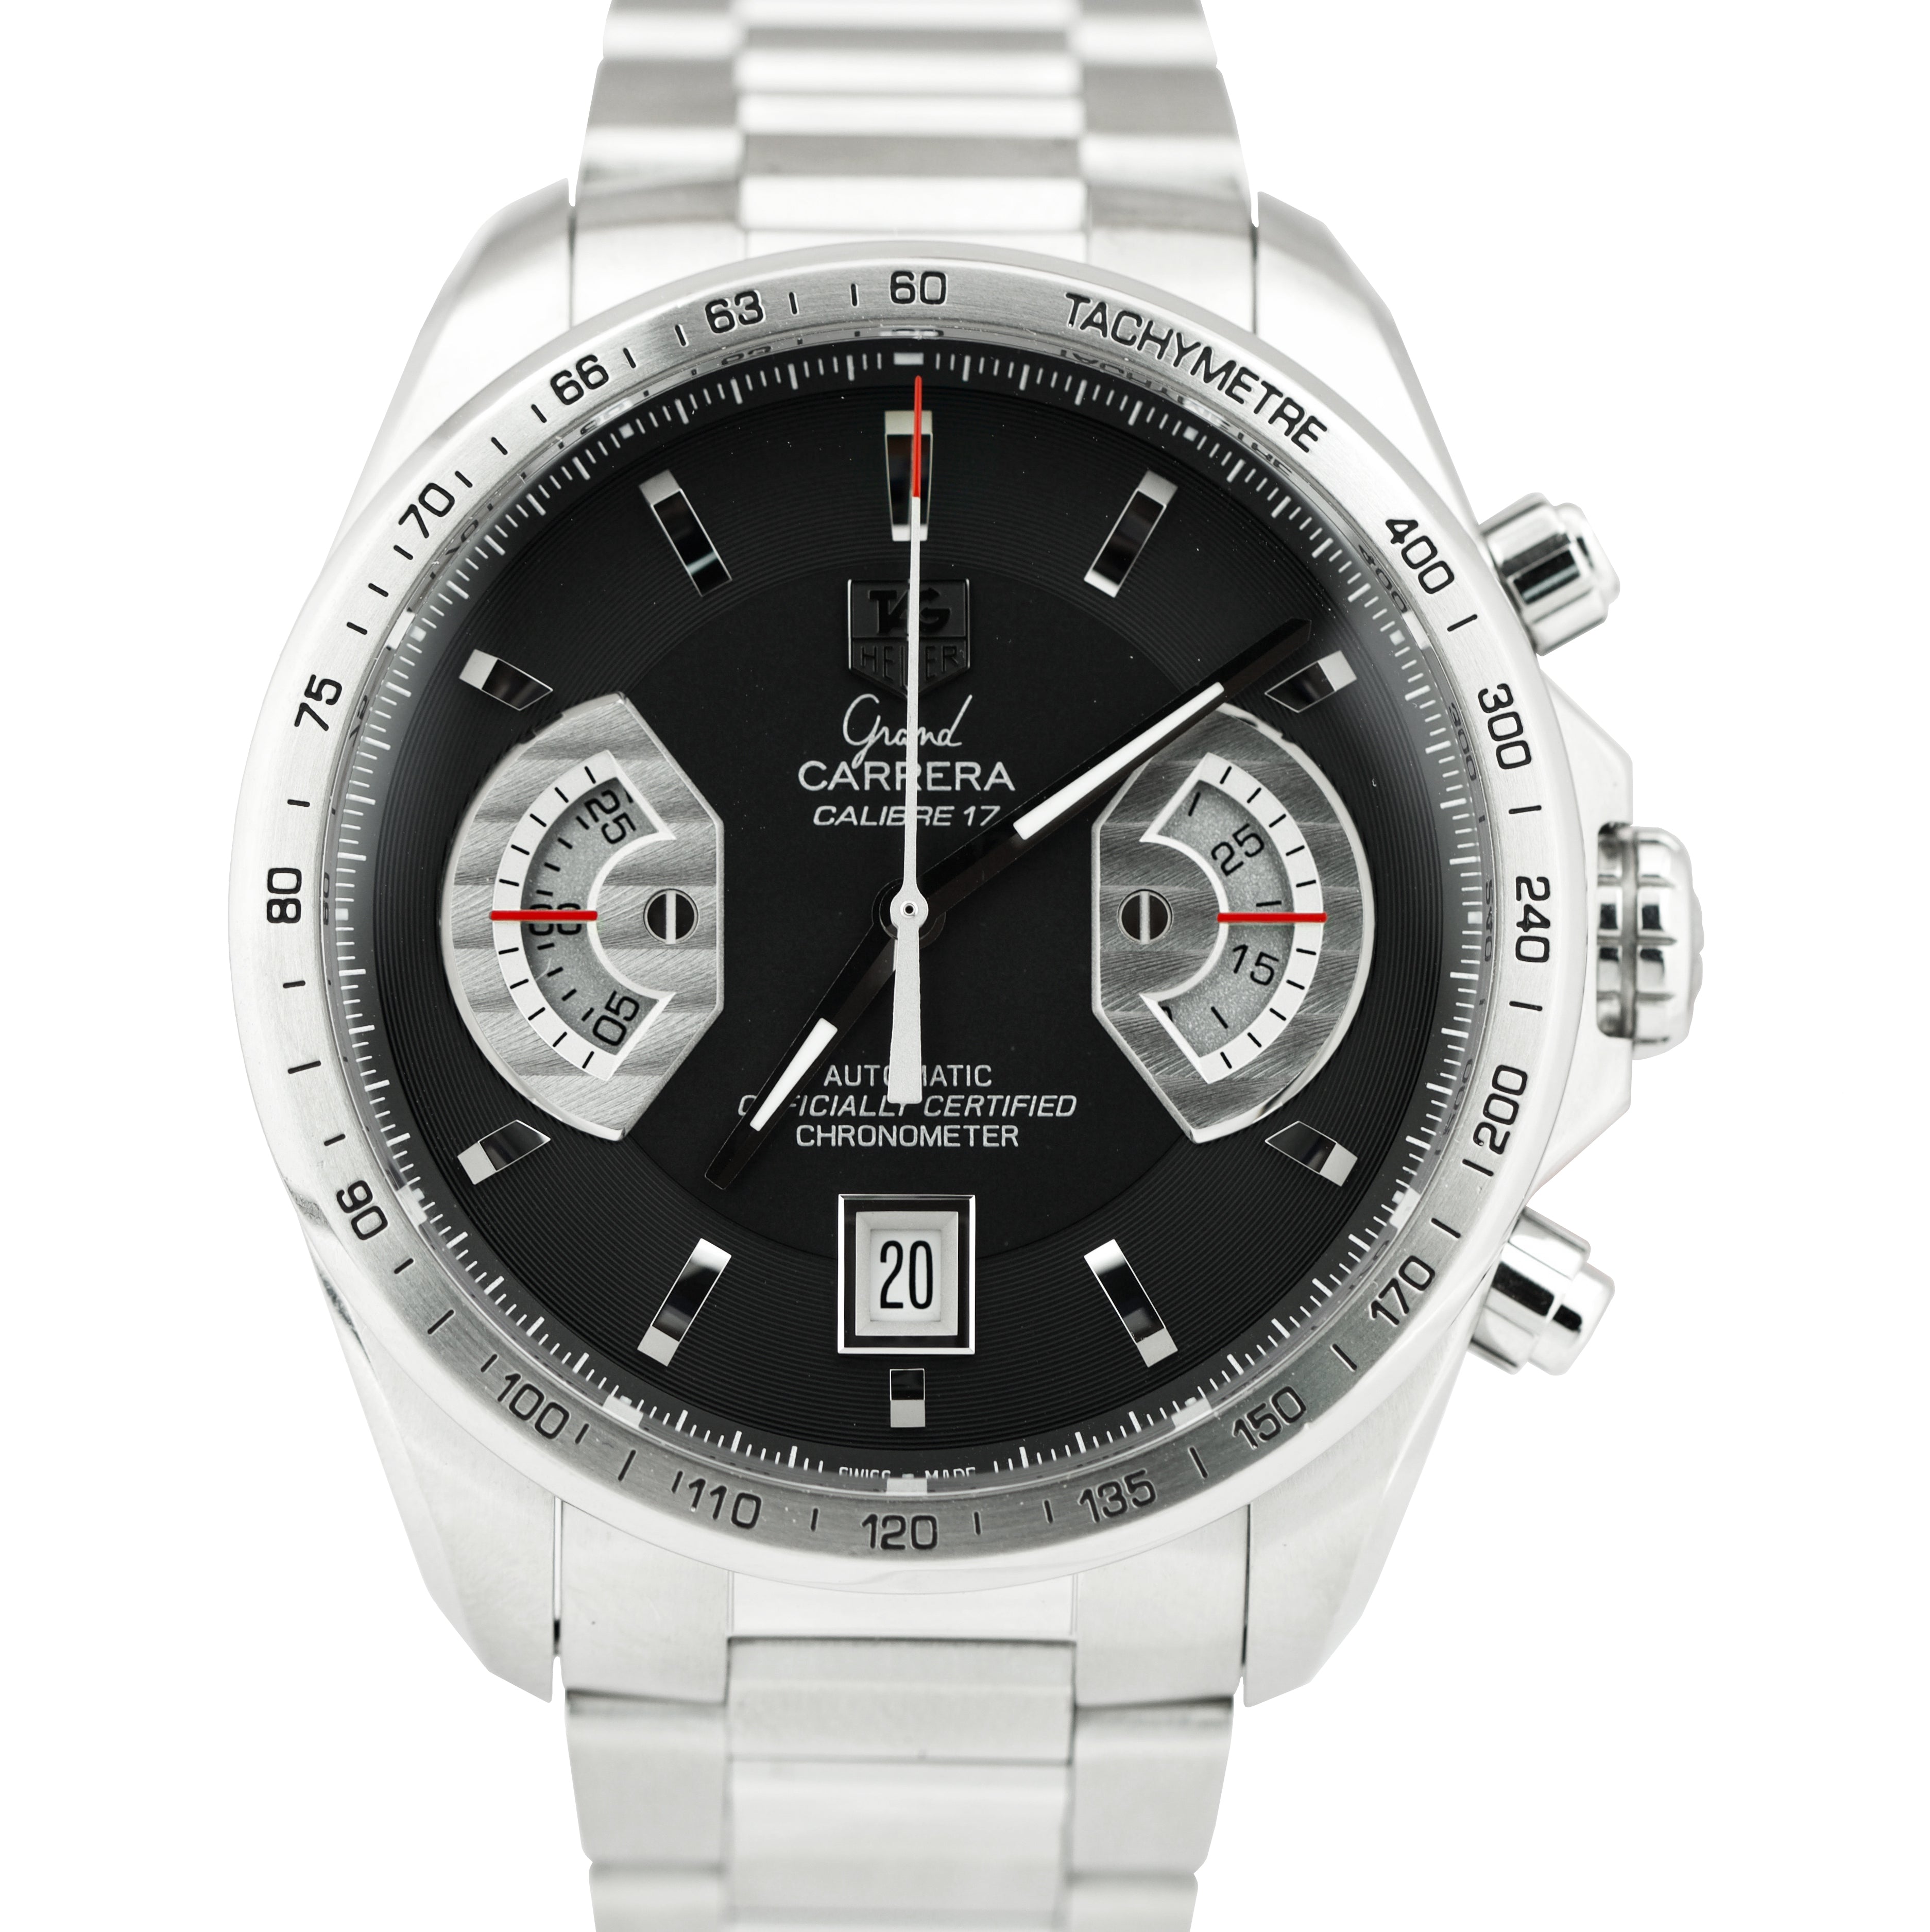 TAG Heuer Grand Carrera for $3,187 for sale from a Private Seller